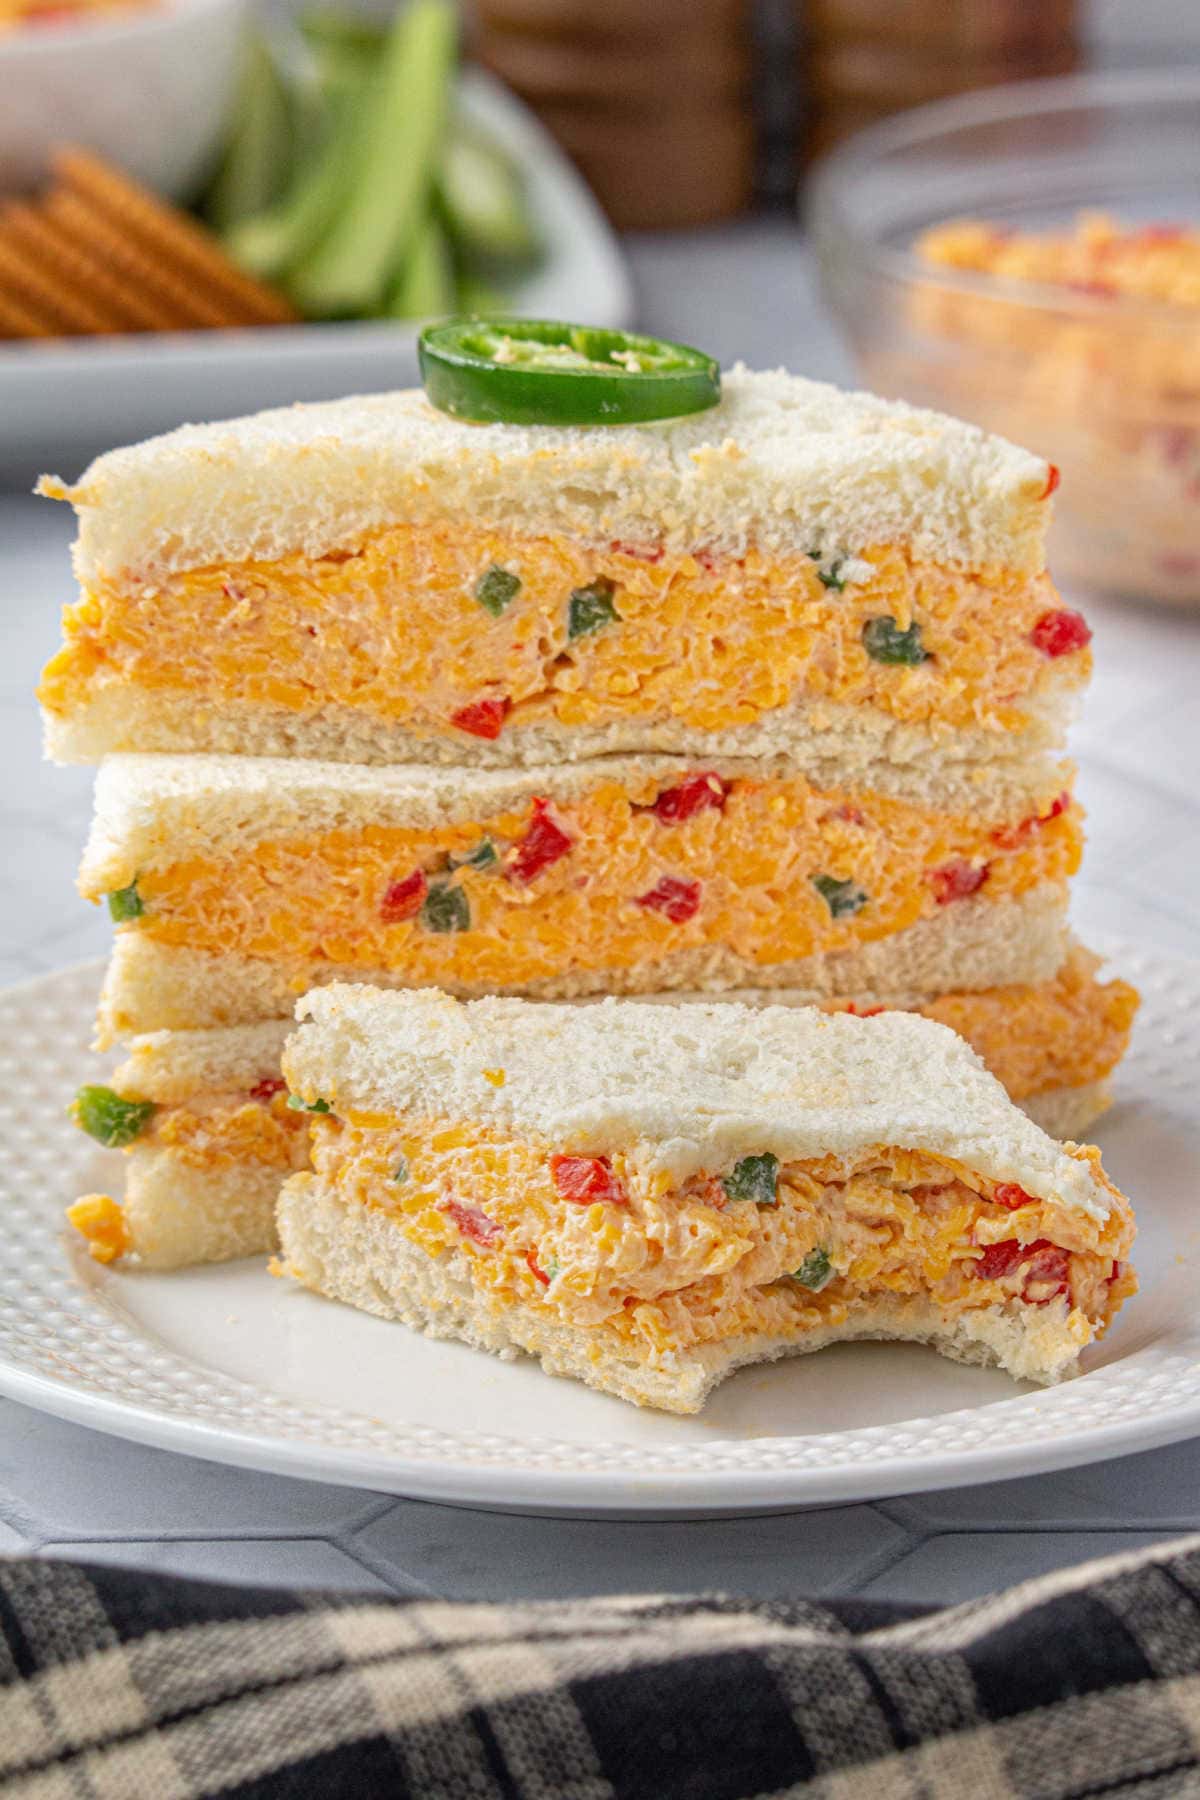 A stack of pimento cheese sandwiches on white bread.